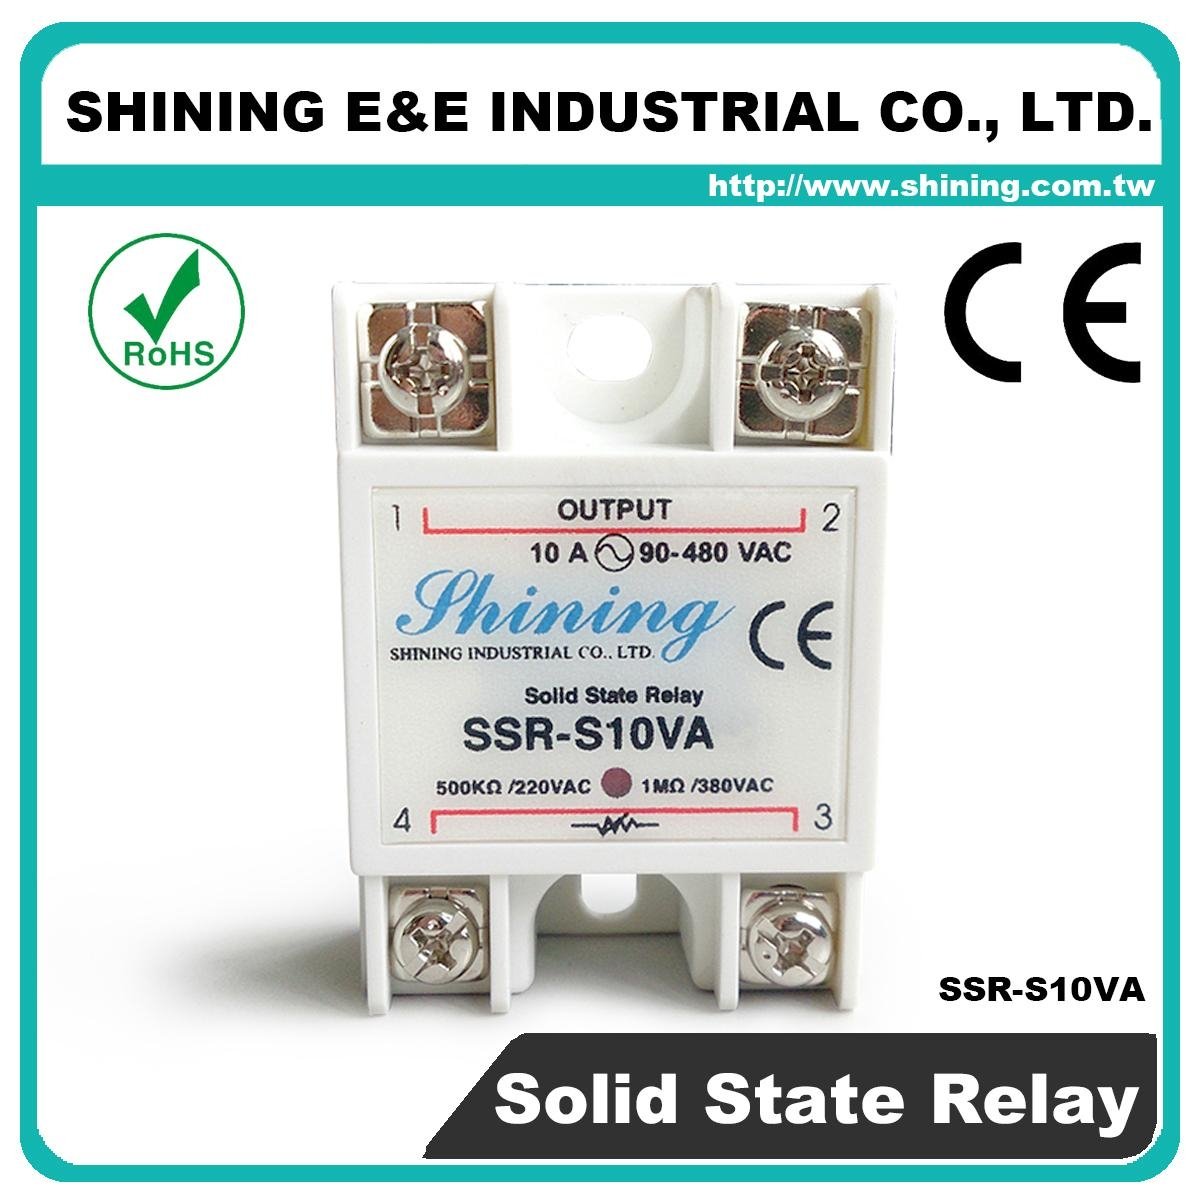 SSR-S10VA Variable Resistor to AC Phase Control Solid State Relay